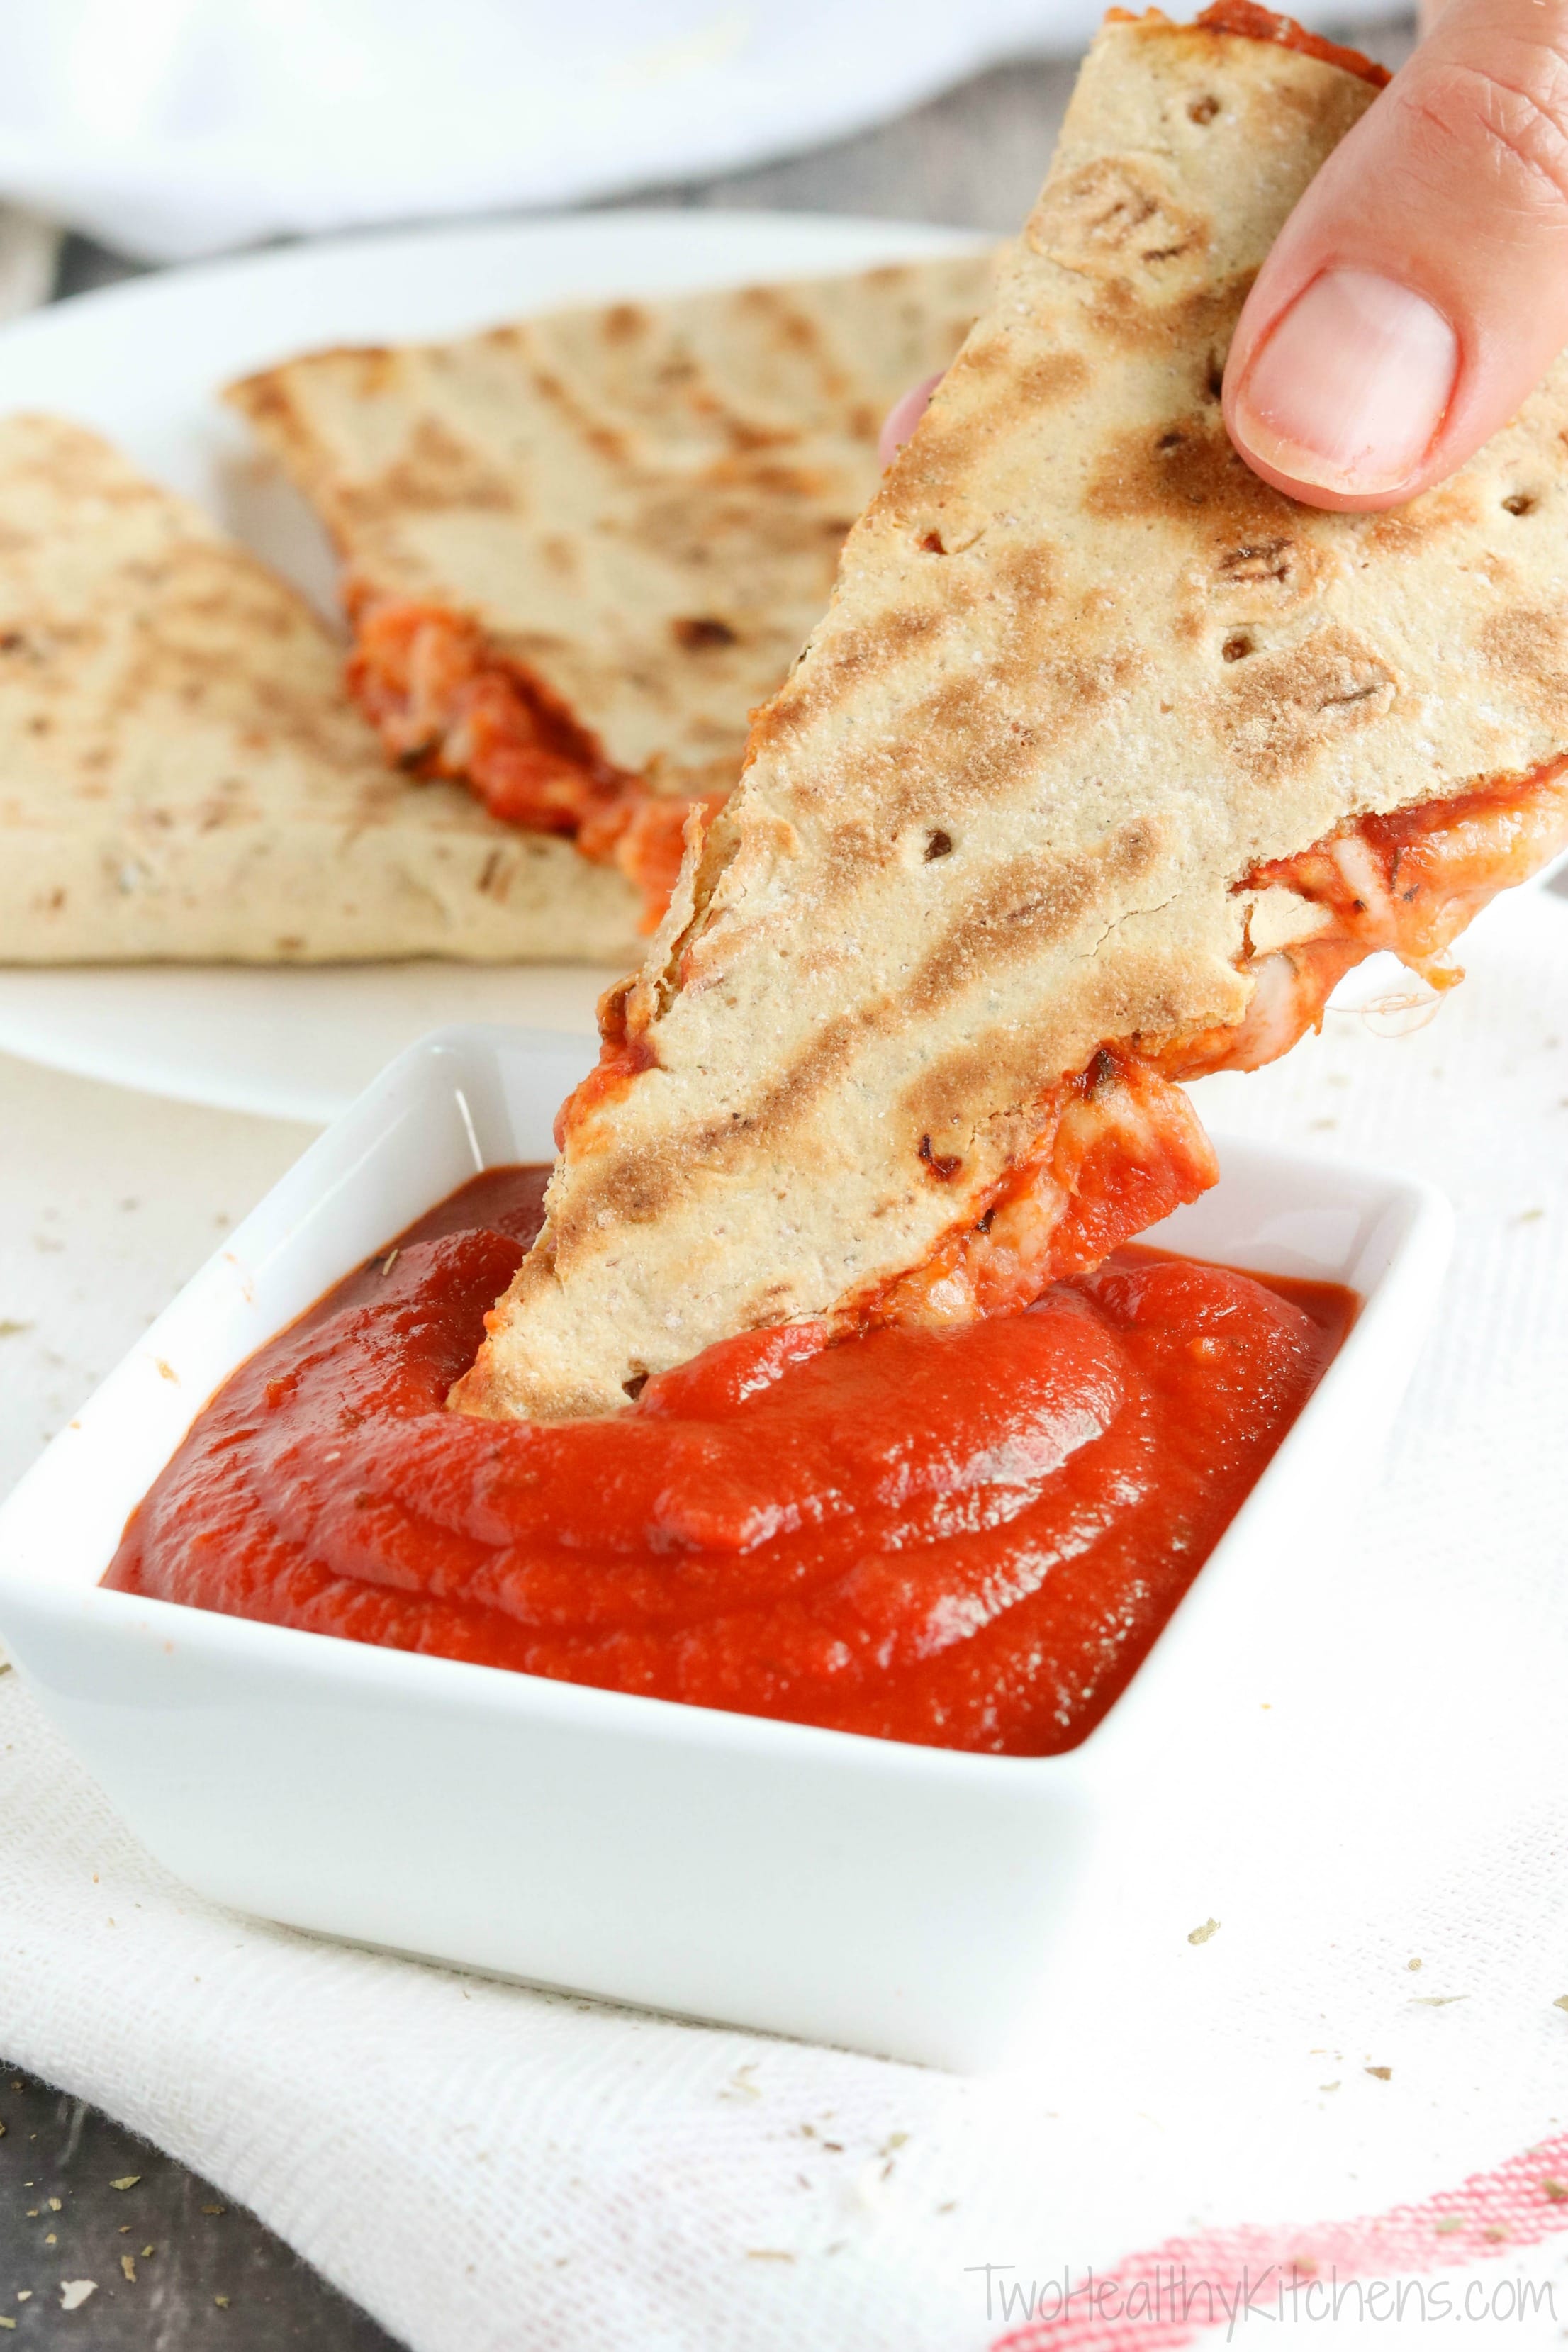 Closeup of hand dipping one quesadilla wedge into little square dish of pizza sauce with more wedges in background.